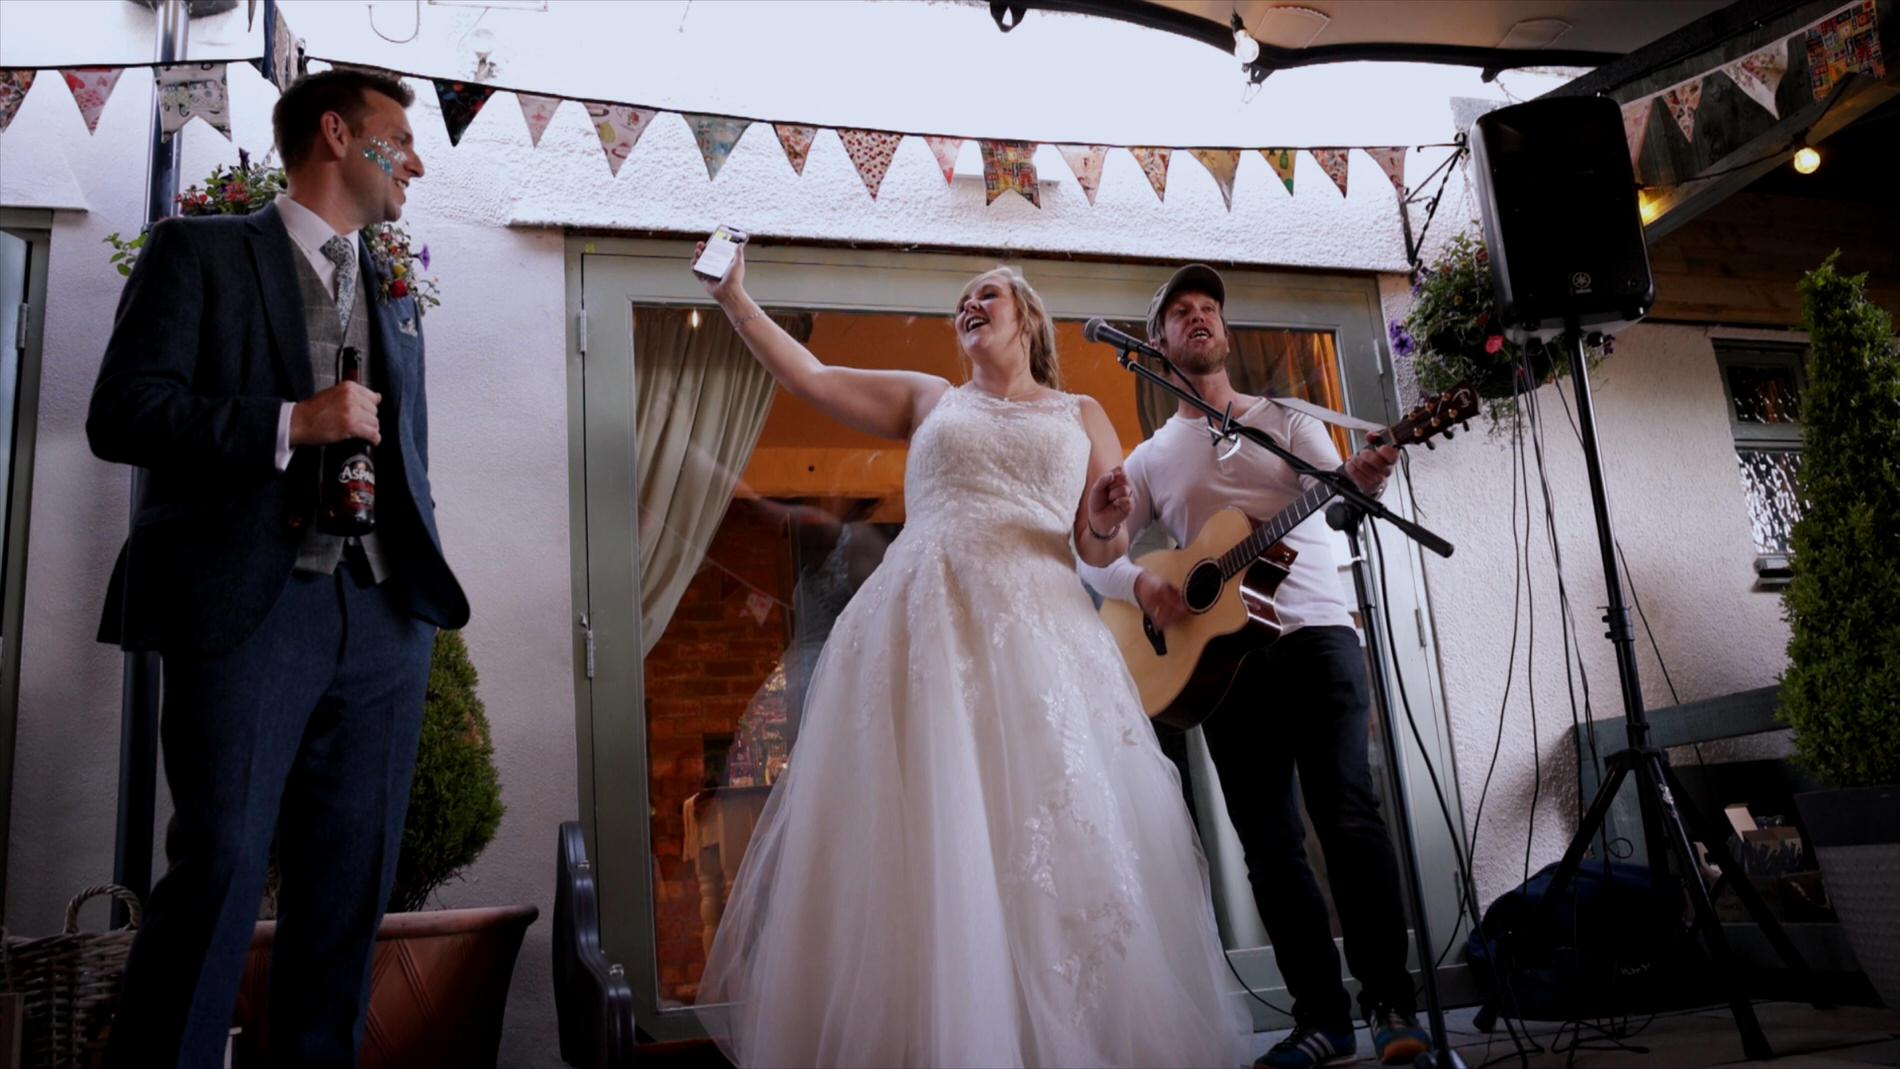 Bride sings along with acoustic singer during wedding at Roby Mill